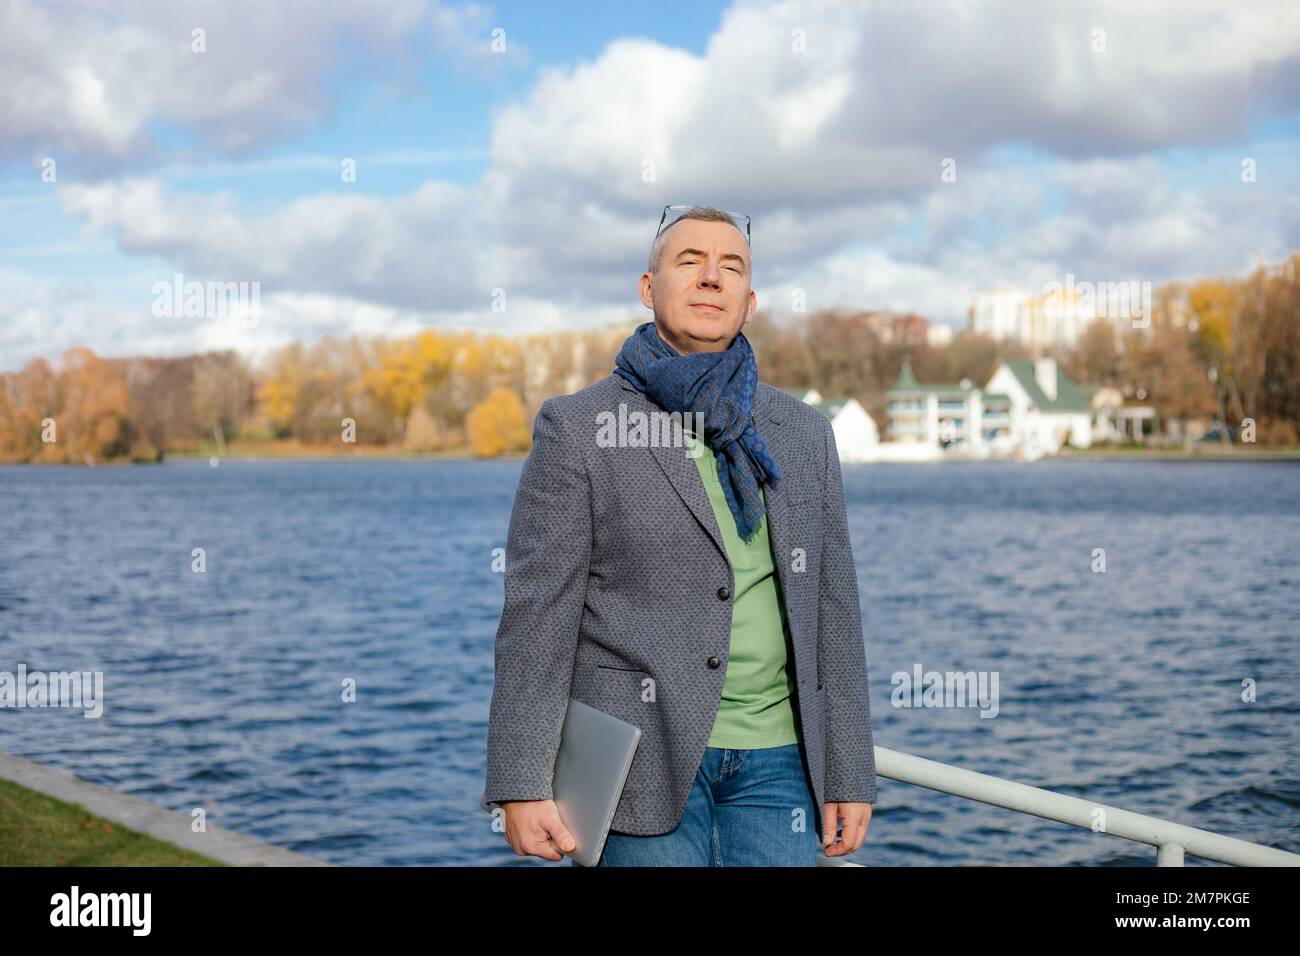 Old businessman in stylish clothes enjoying with closed eyes natural beauty. Man walk outdoors near water pond.  Stock Photo